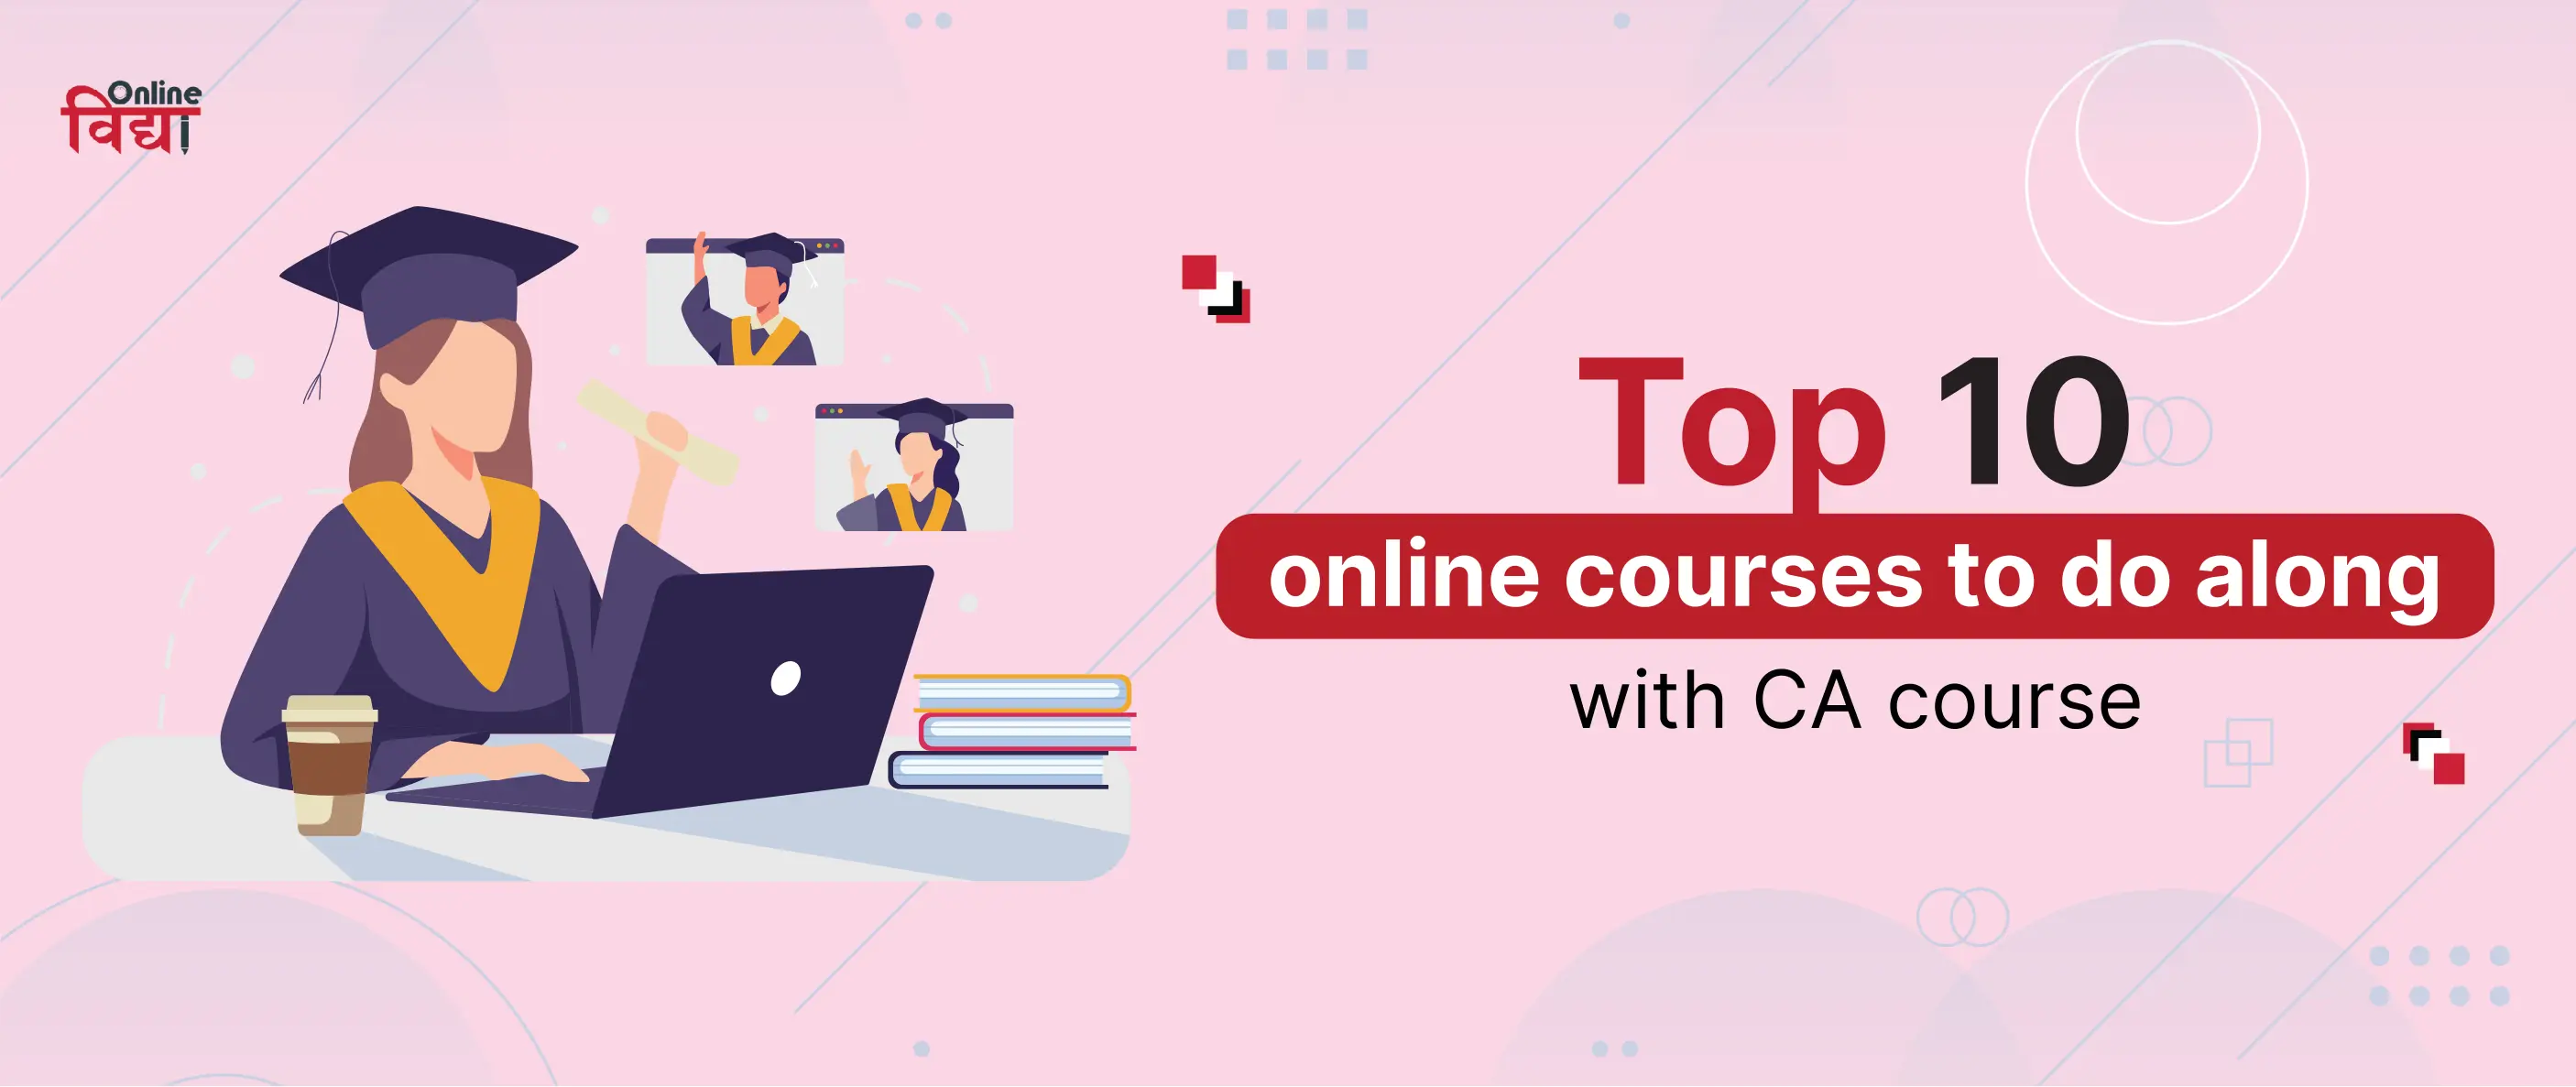 Top 10 online courses to do along with the CA course